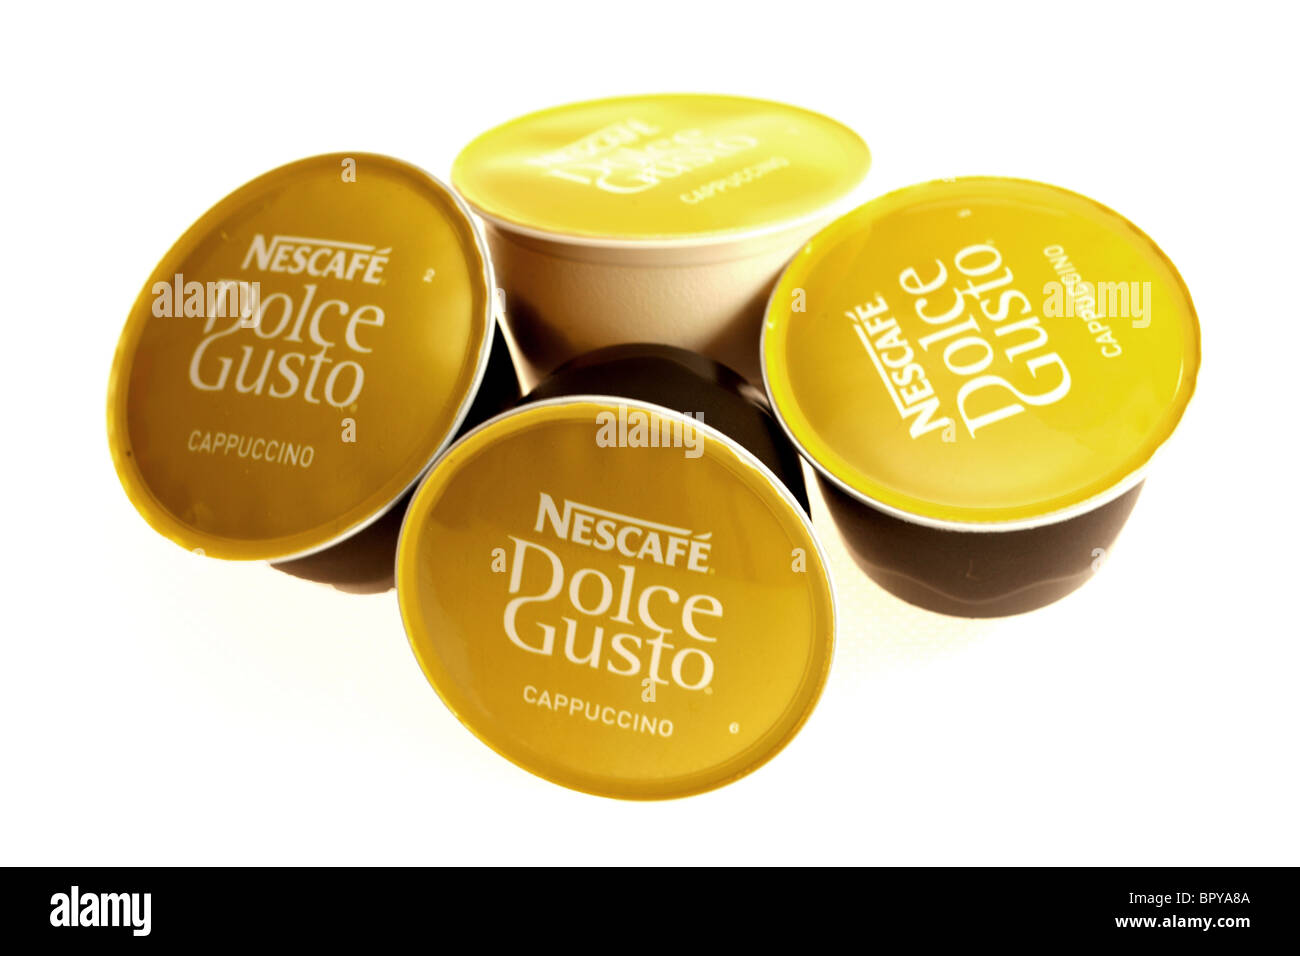 Nescafe Dolce Gusto High Resolution Stock Photography and Images - Alamy